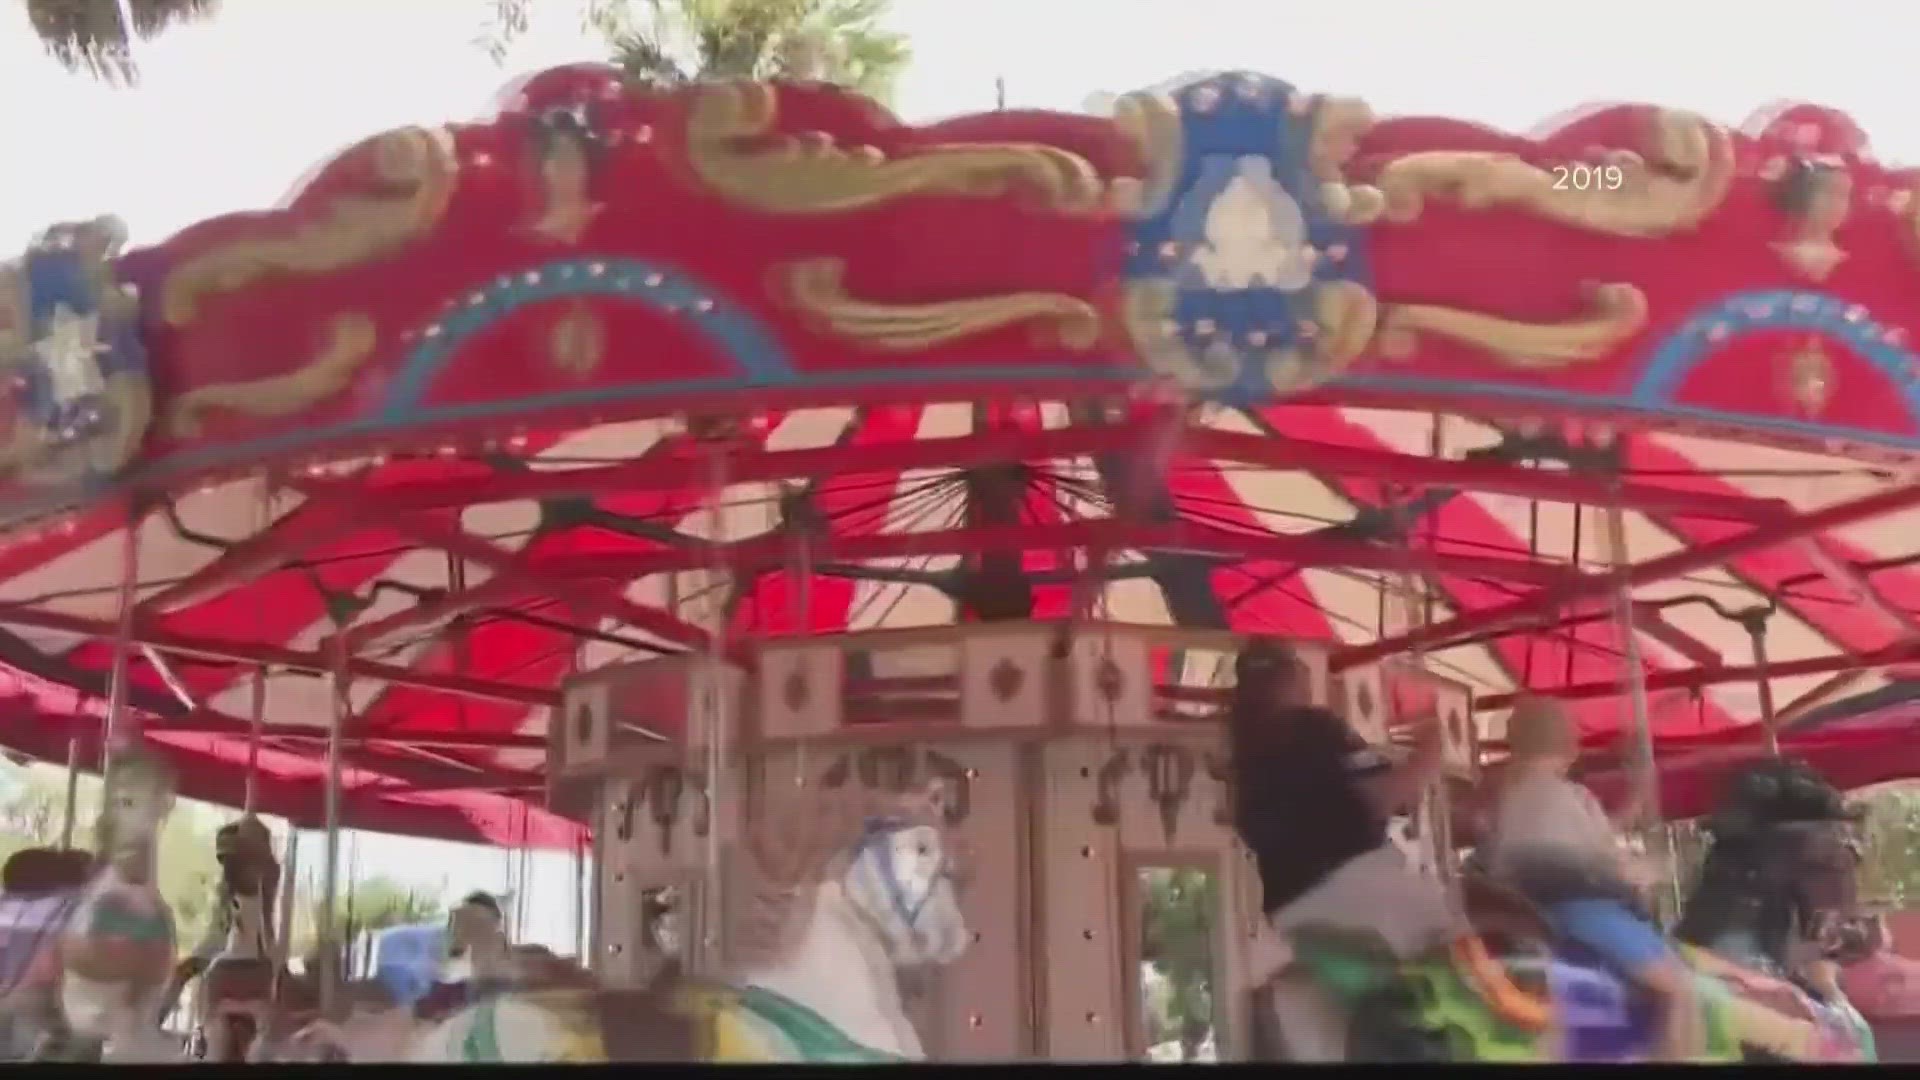 Man wants to bring carousel back to St. Augustine